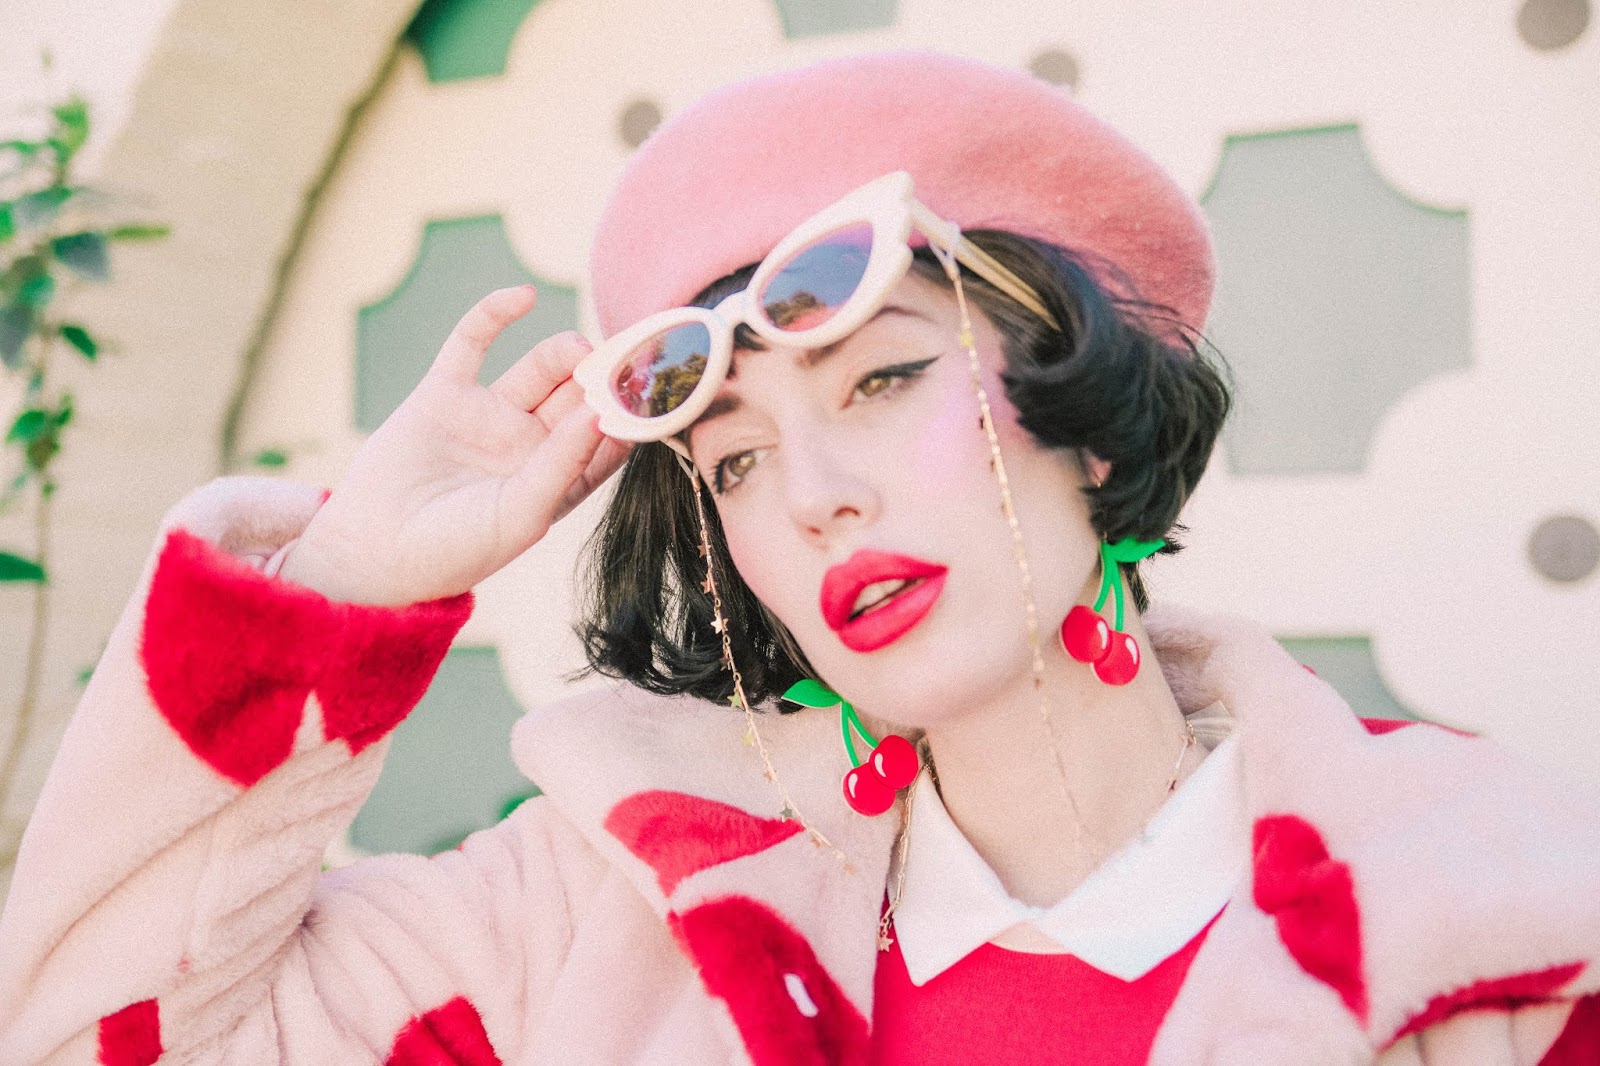 Red Dots - A Fashion Nerd, A Colorful Fashion Blogger in Los Angeles